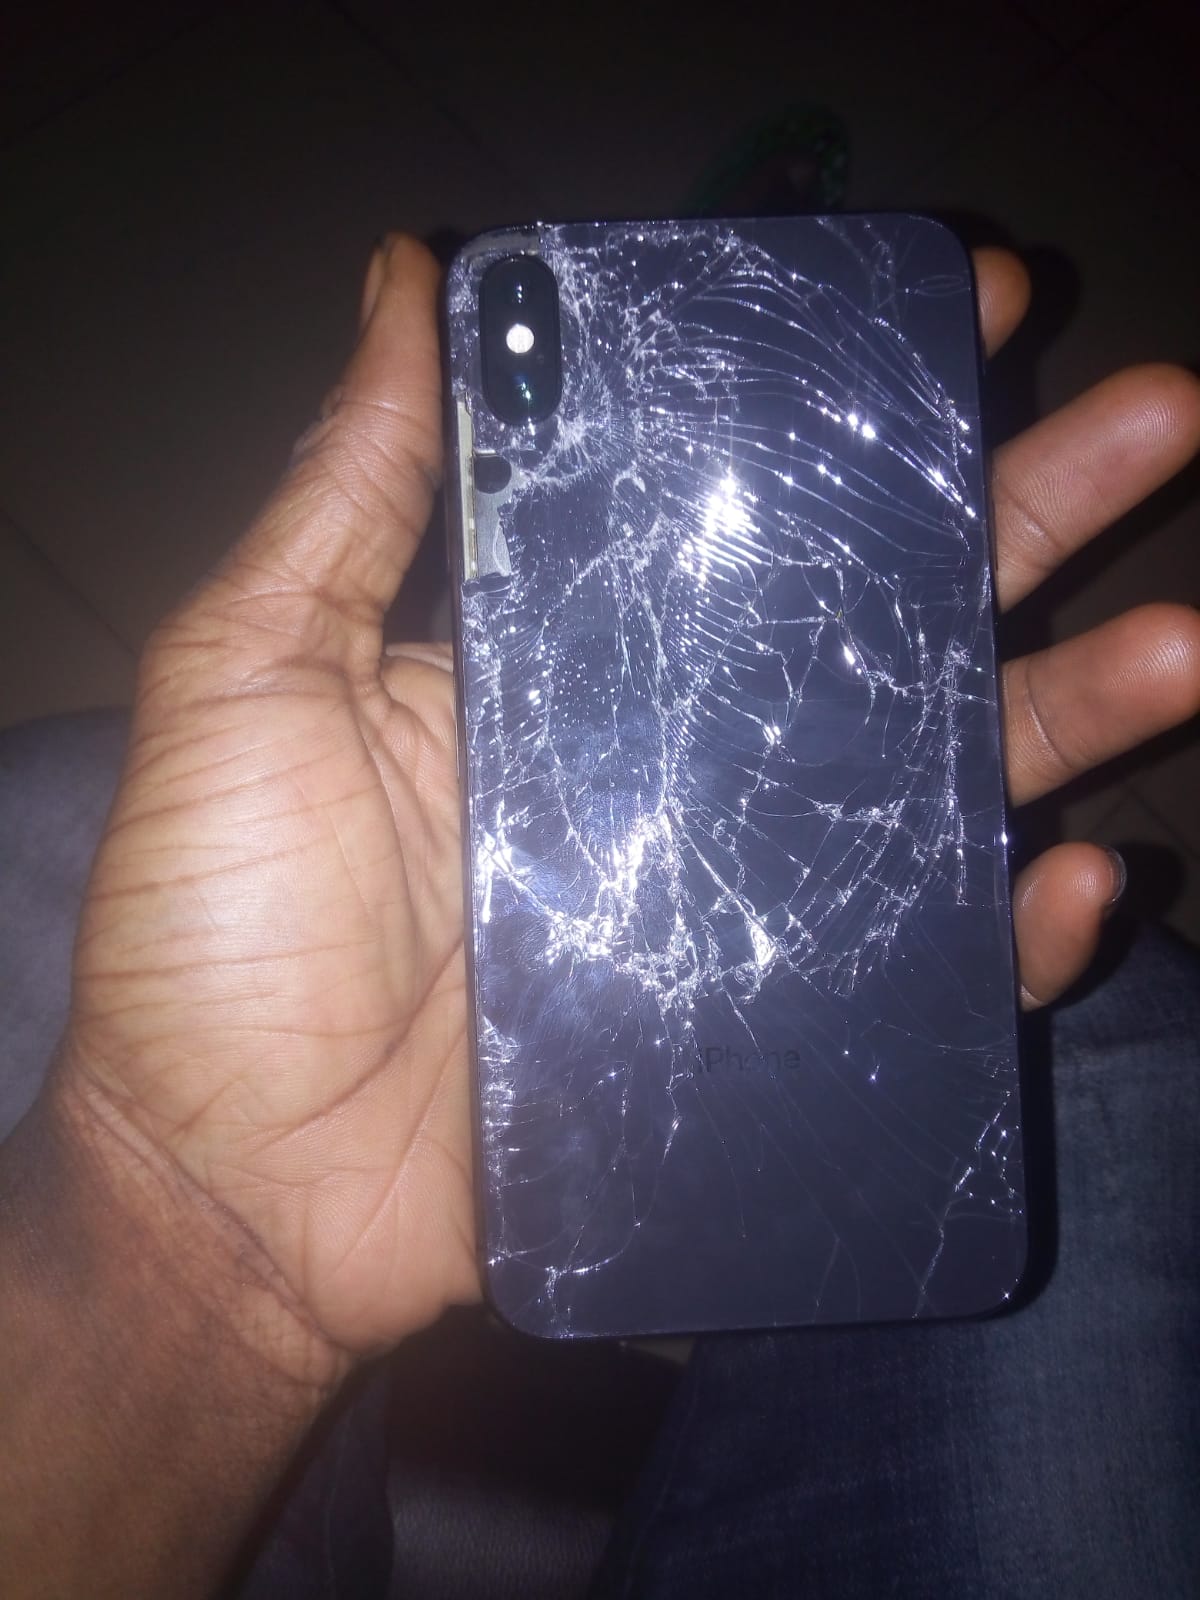 How Much Does It Cost To Repair The Screen Of An Iphone Xr Phones Nigeria